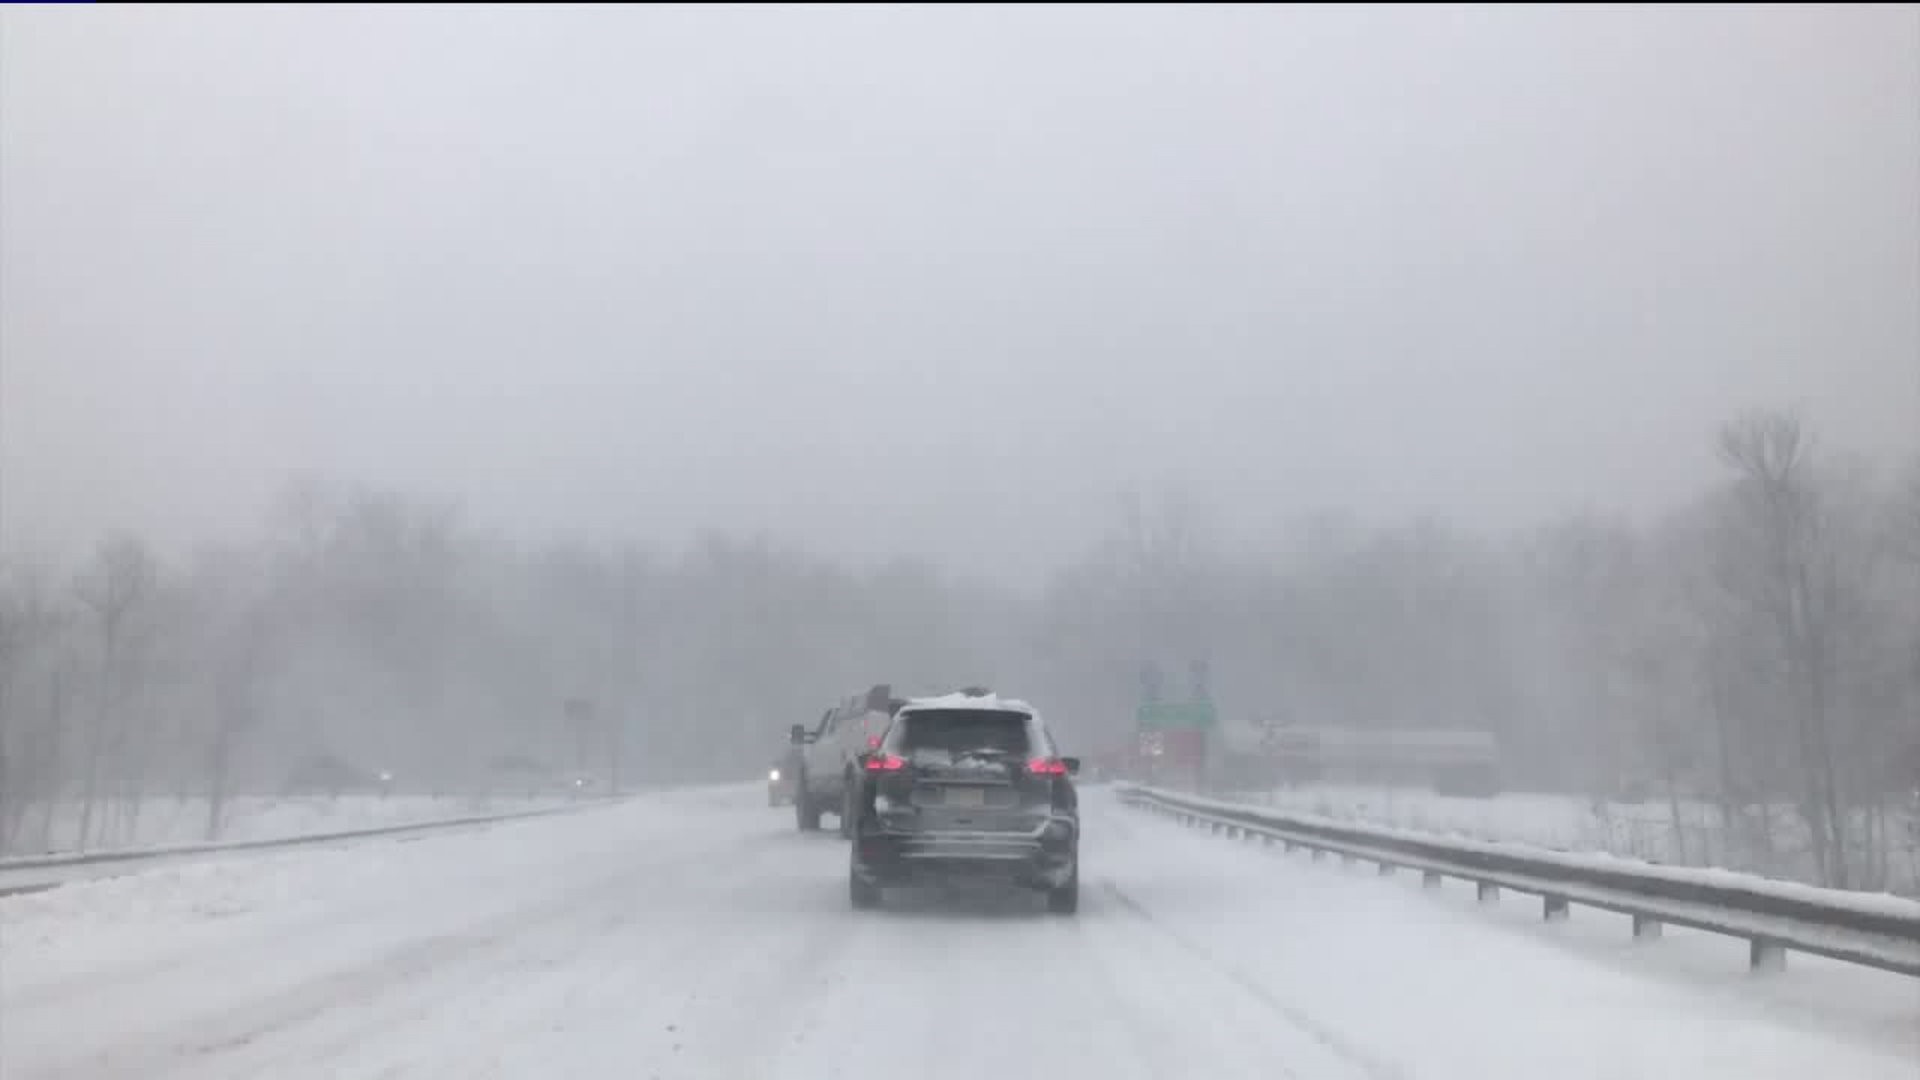 PennDOT, Turnpike Commission Banning Certain Vehicles from Highways due to Winter Storm